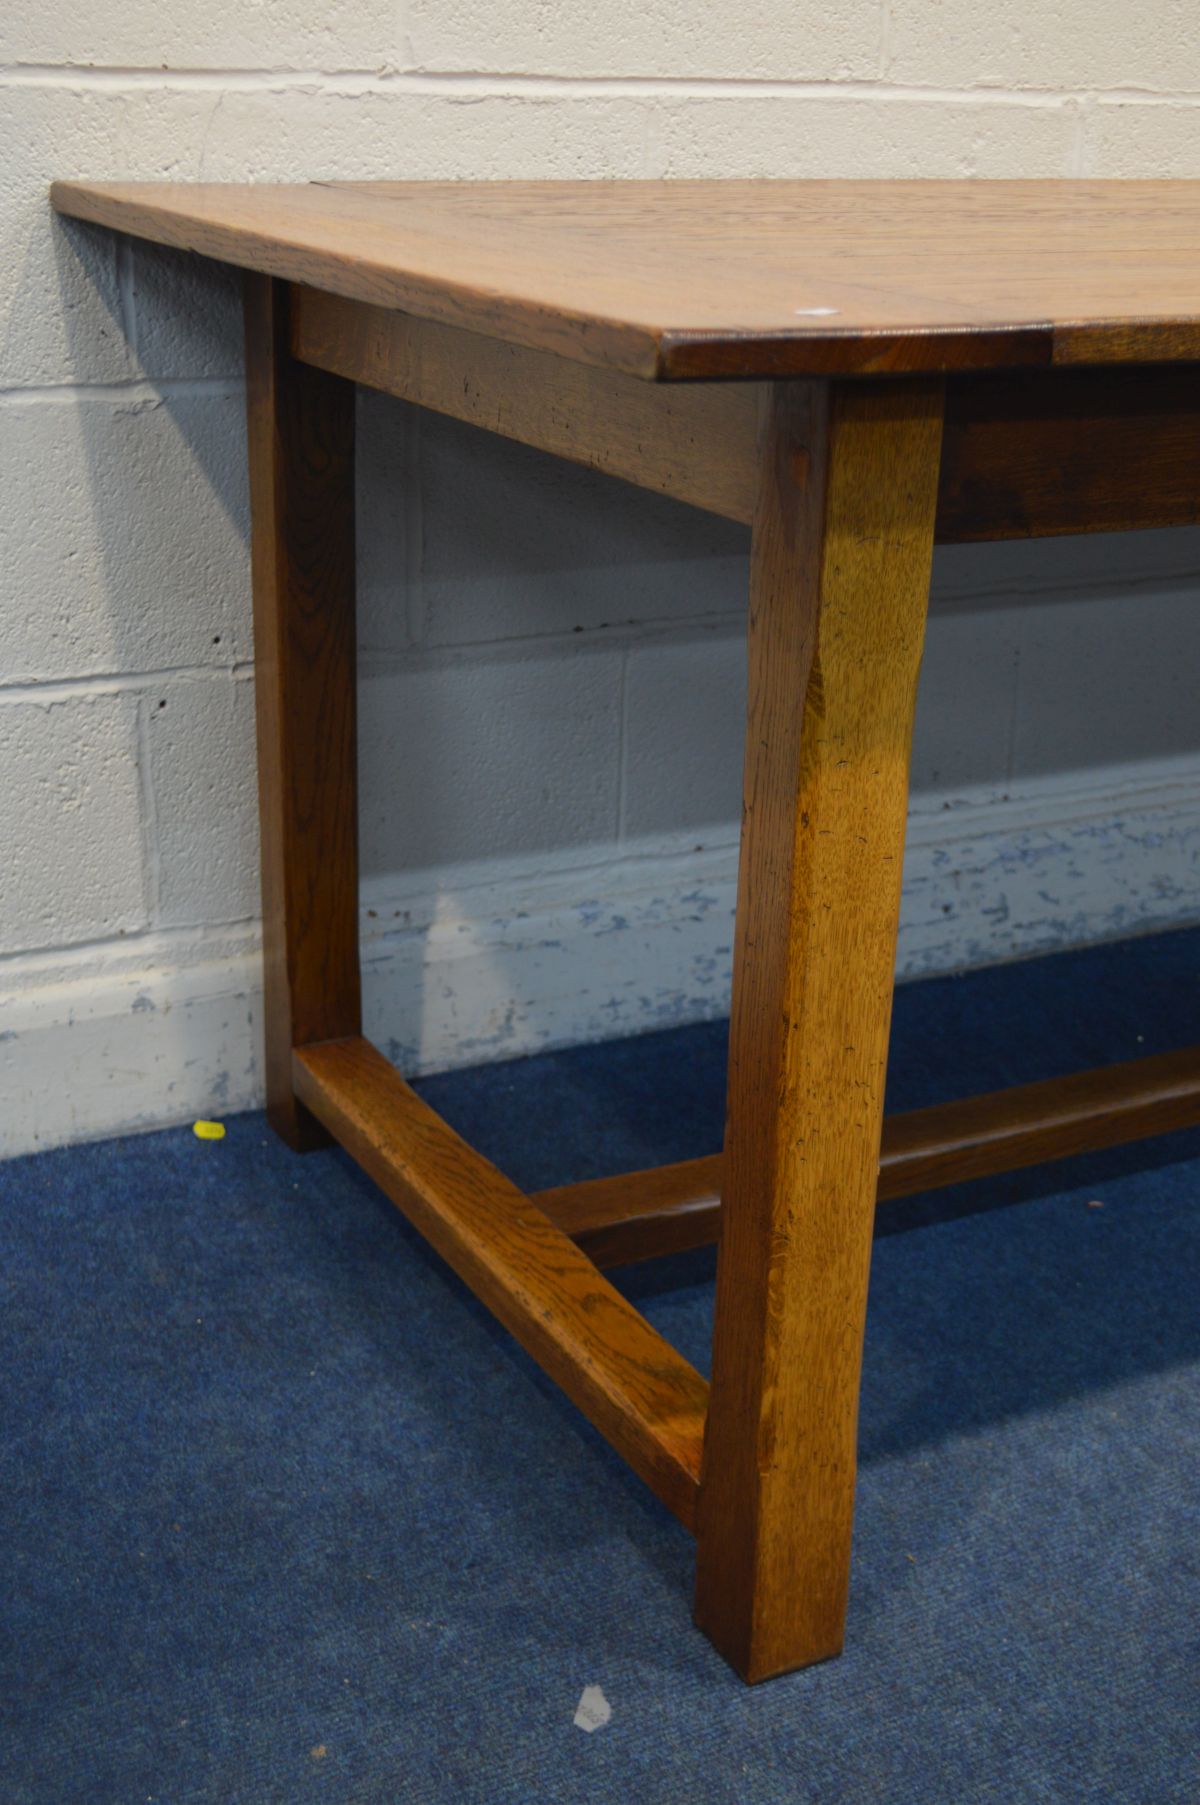 A REPRODUCTION OAK REFECTORY TABLE, in an 18th century style, plank top, on chamfered legs united by - Image 3 of 3